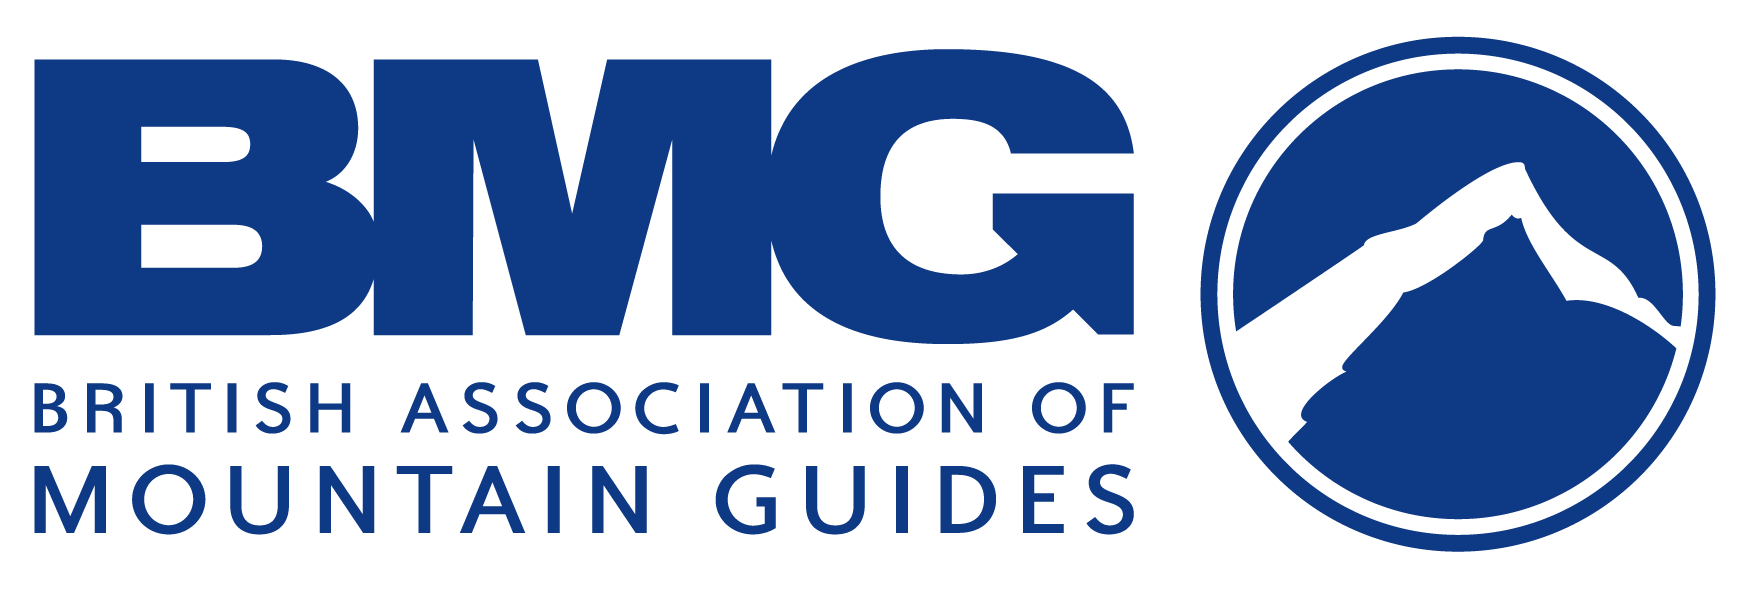 British Association of Mountain Guides